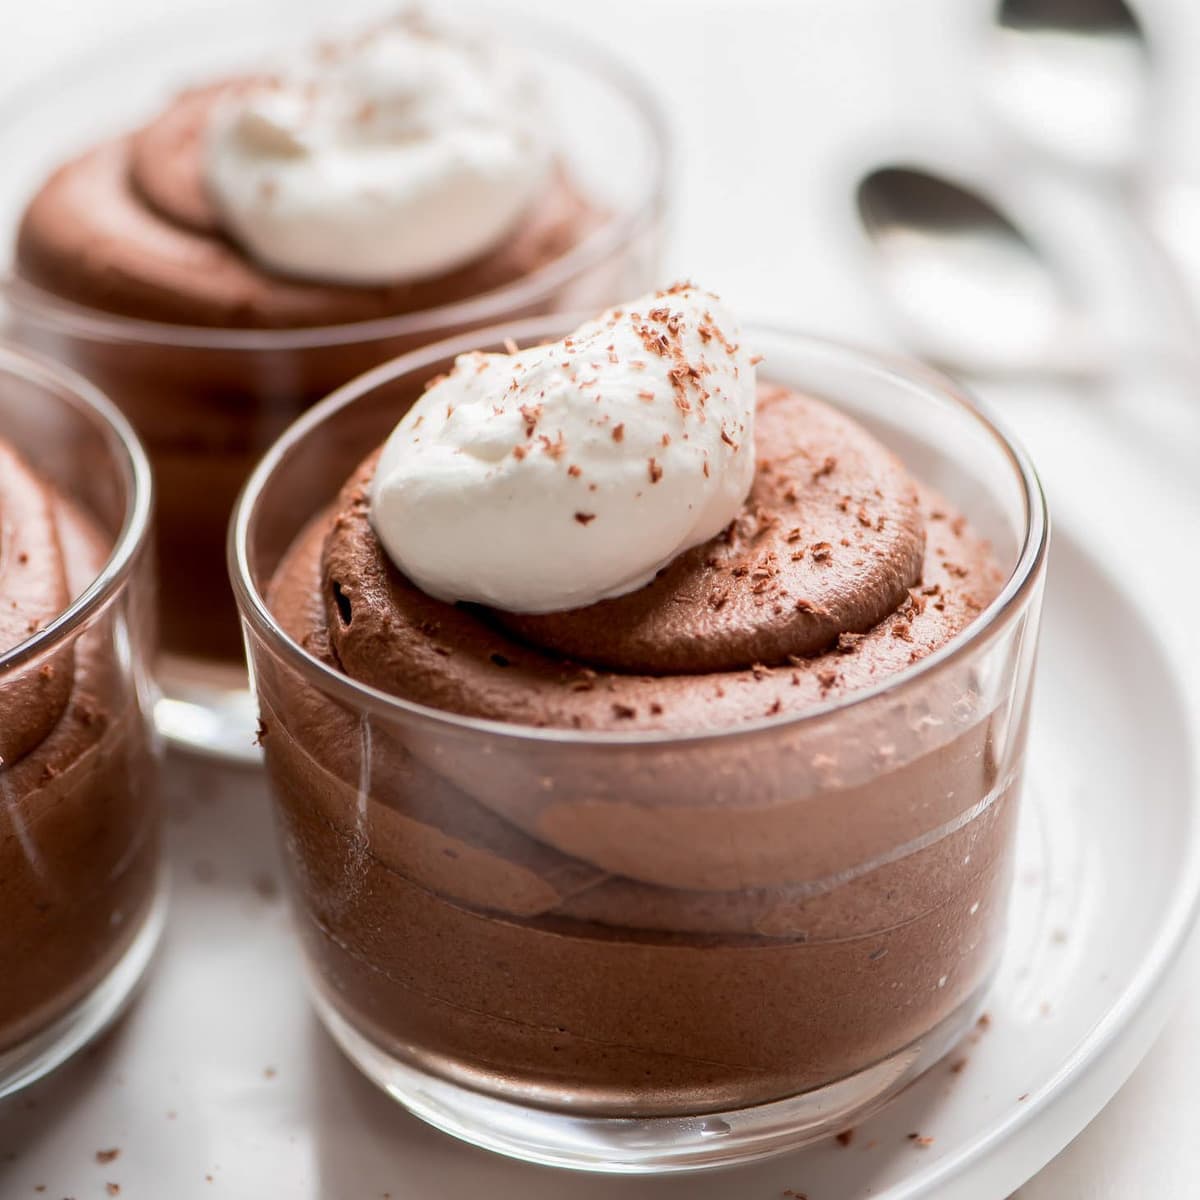 New years eve desserts - a glass cup filled with chocolate mousse and topped with whipped cream.